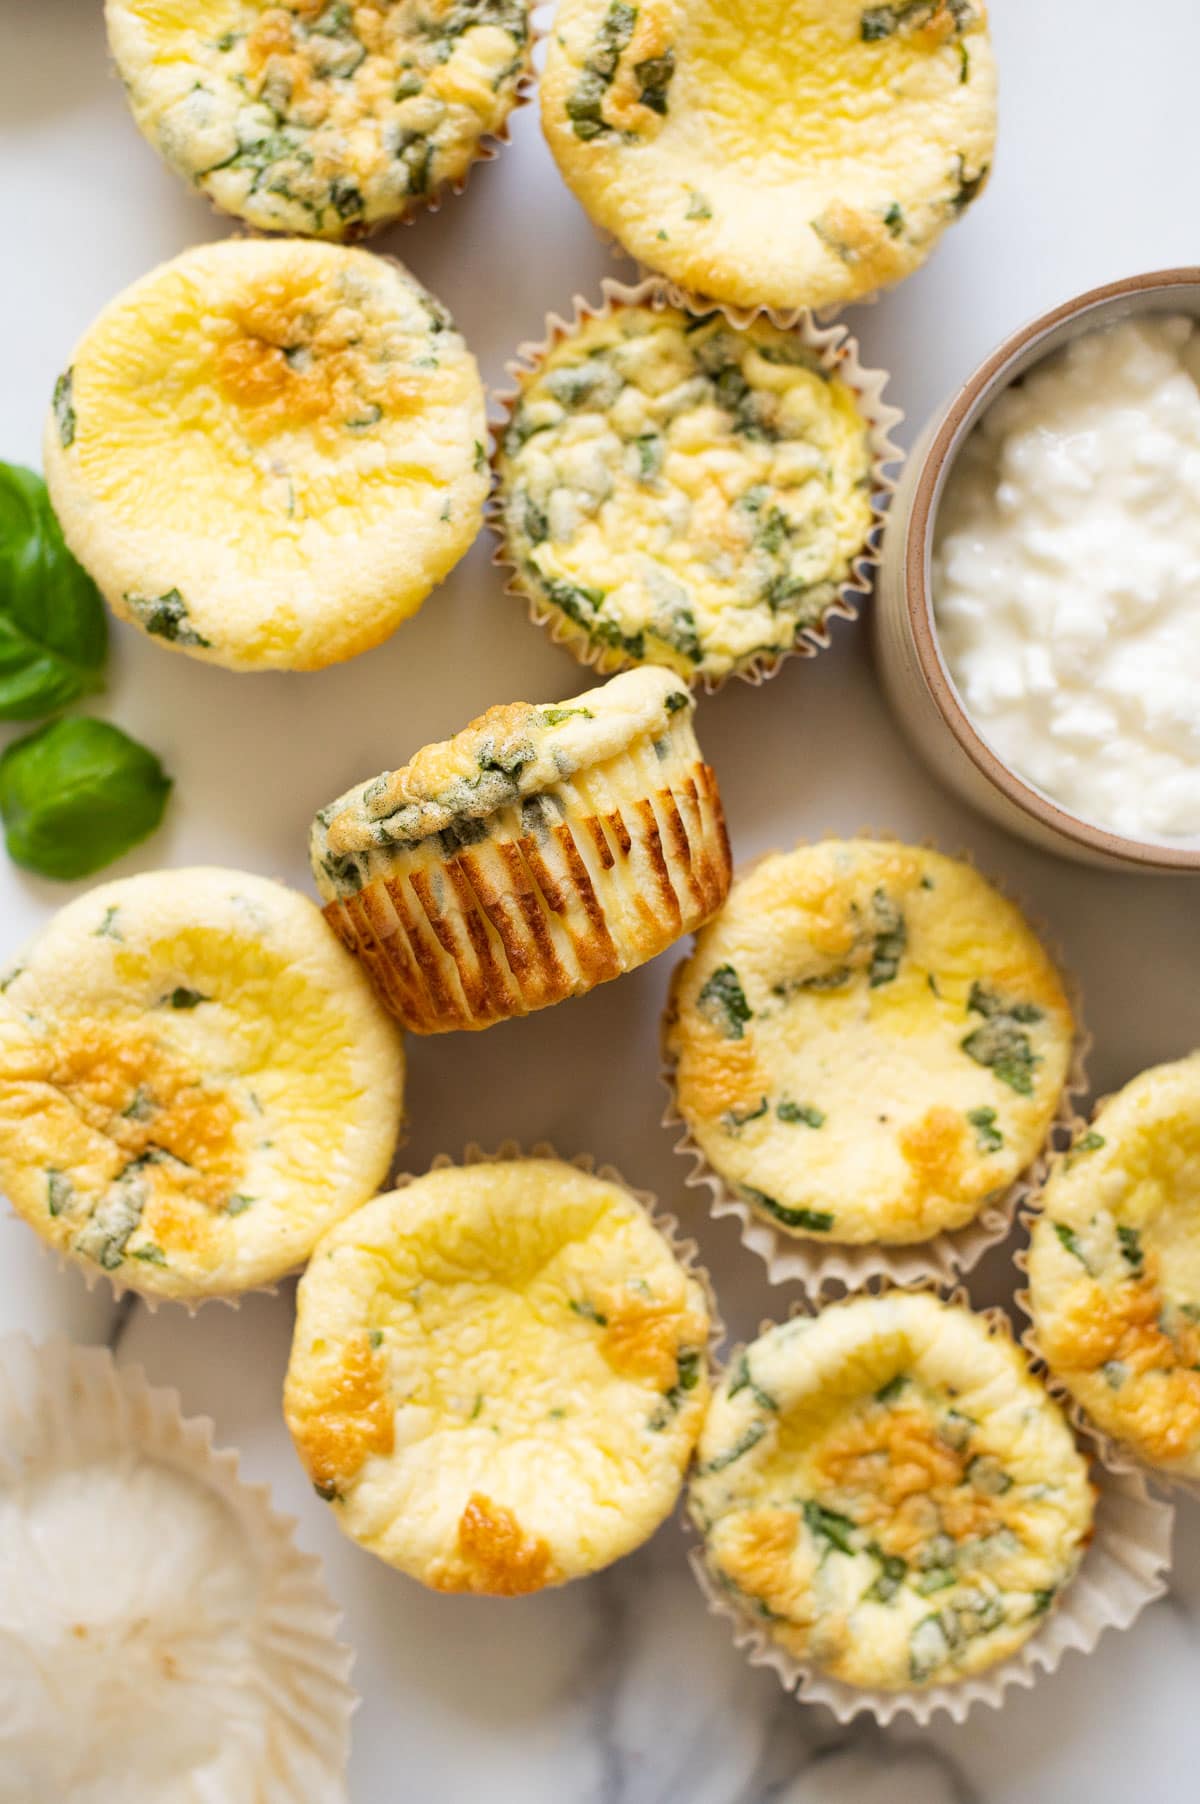 Egg bites with cottage cheese and basil in muffin liners.